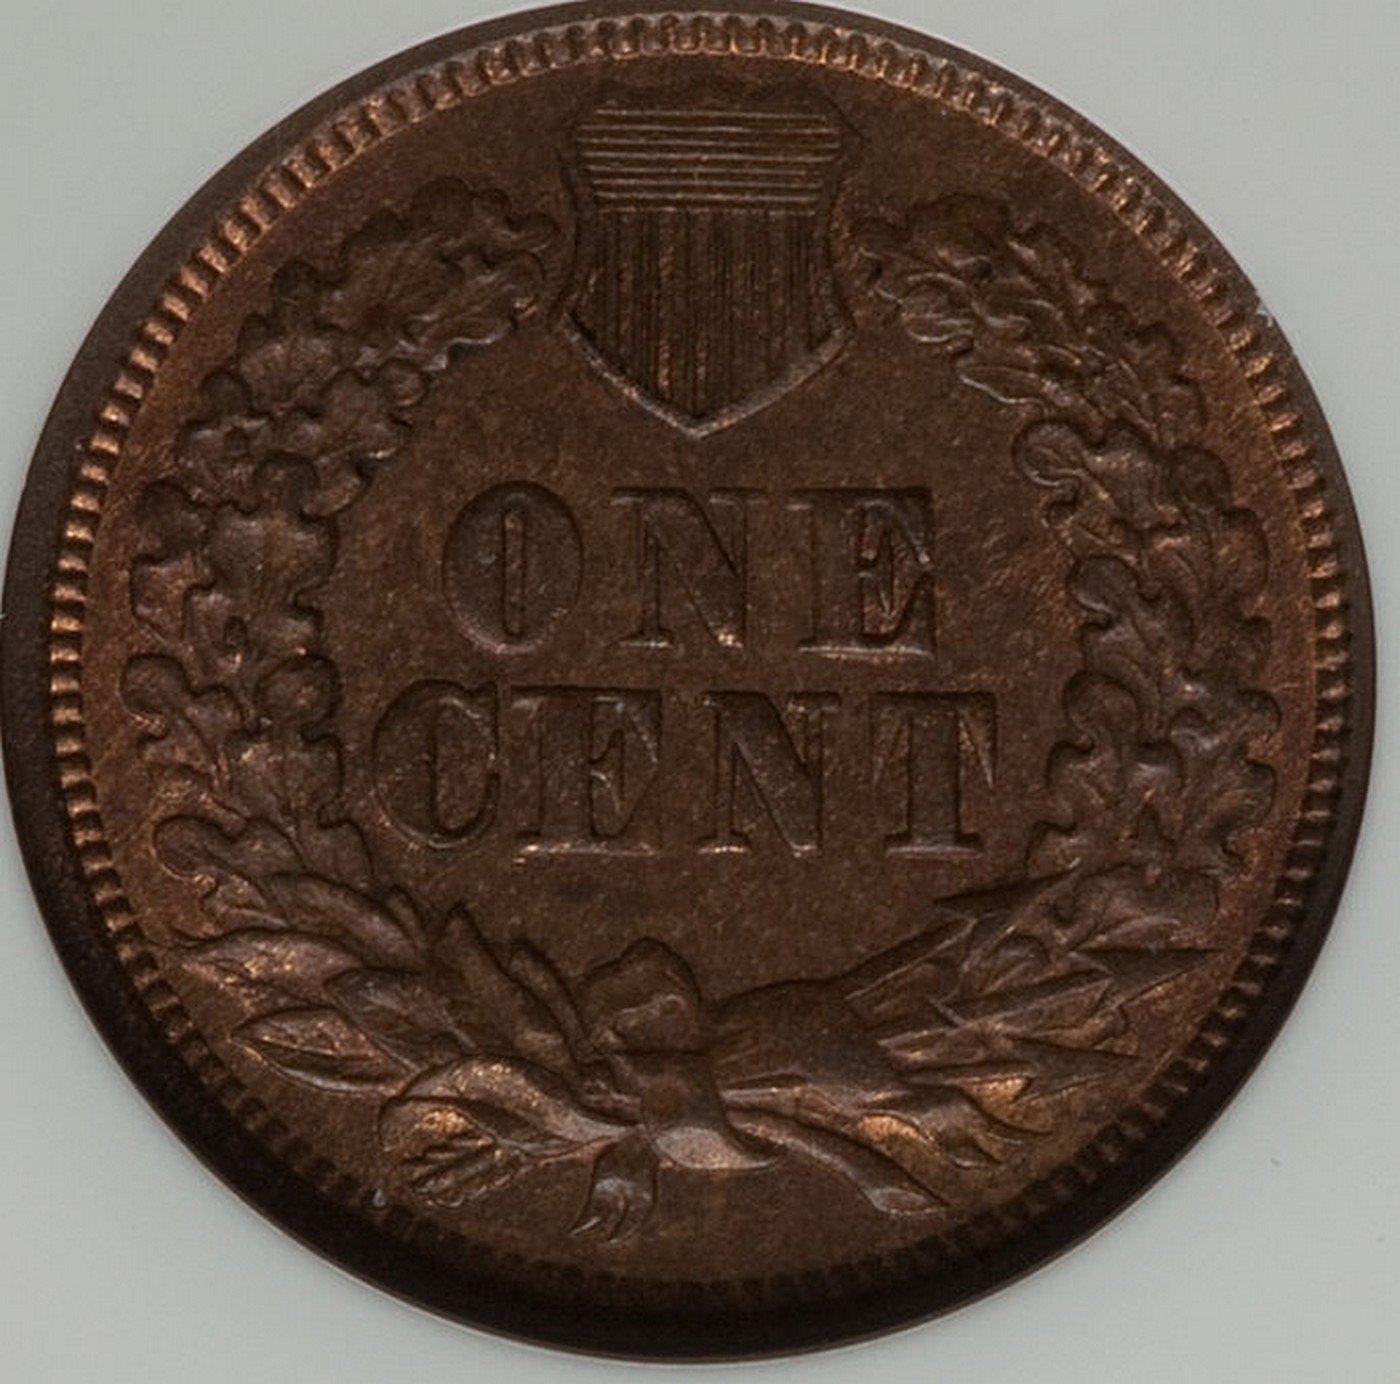 1870 DDR-008 Indian Head Penny - Photos courtesy of Heritage Auctions